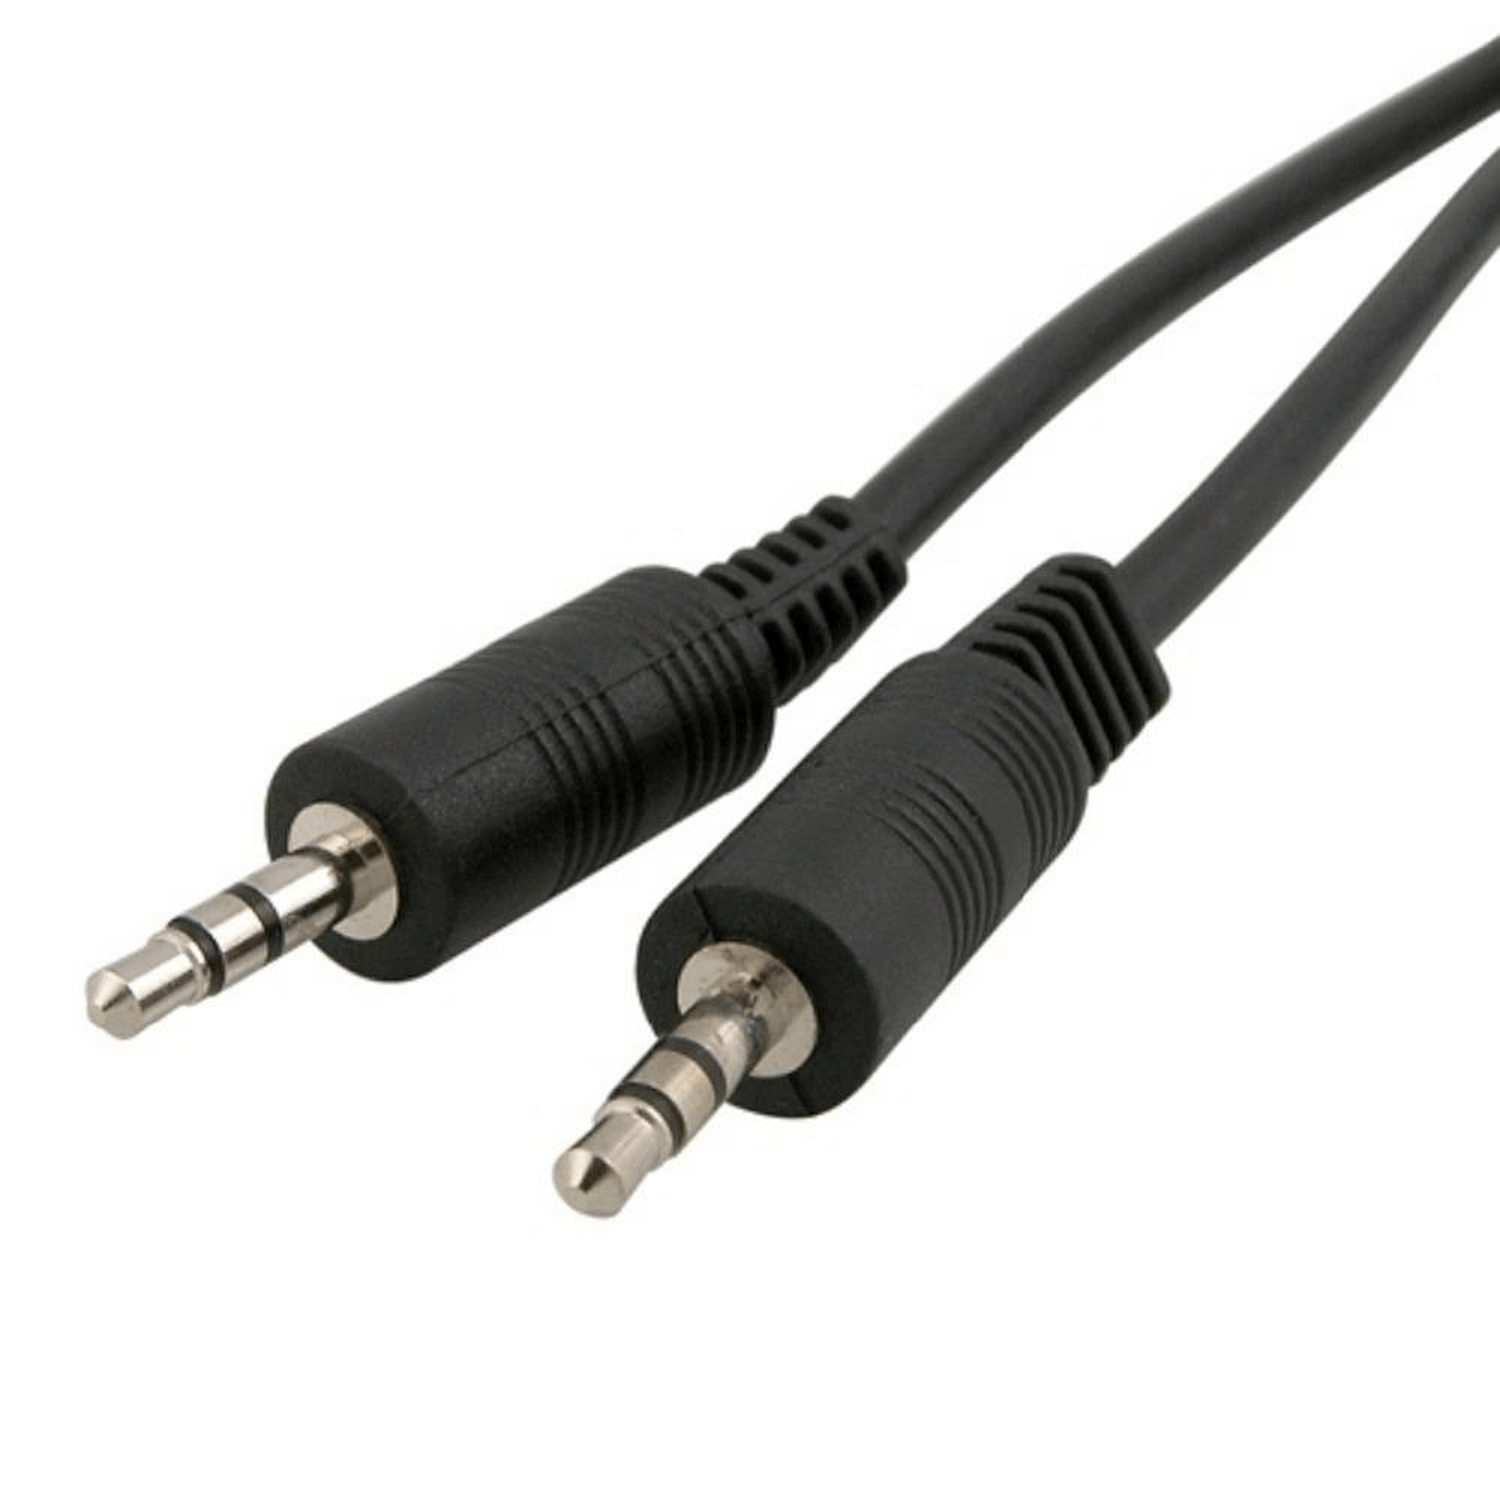 Sunfly Music 3.5mm to 3.55mm Stereo Line to Line 1M Audio Cable - Karaoke Home Entertainment